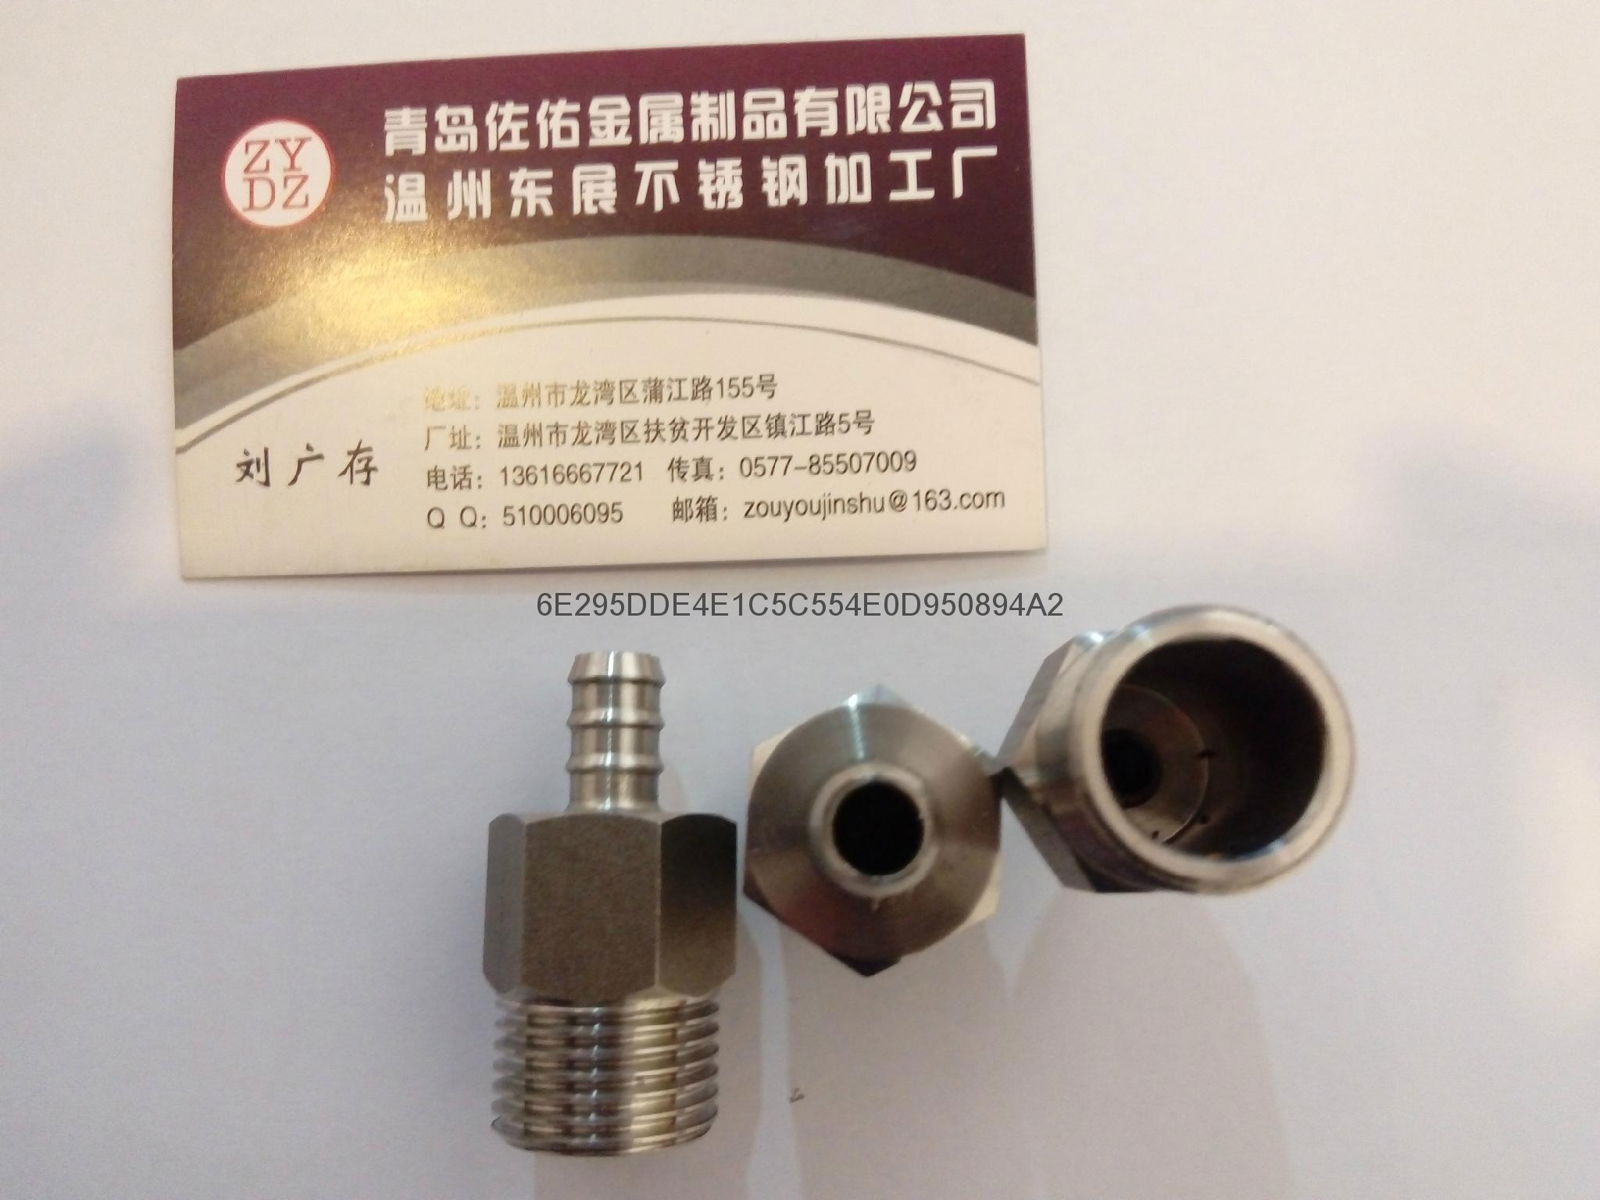 Stainless steel sanitary fittings water heater hose connector  3